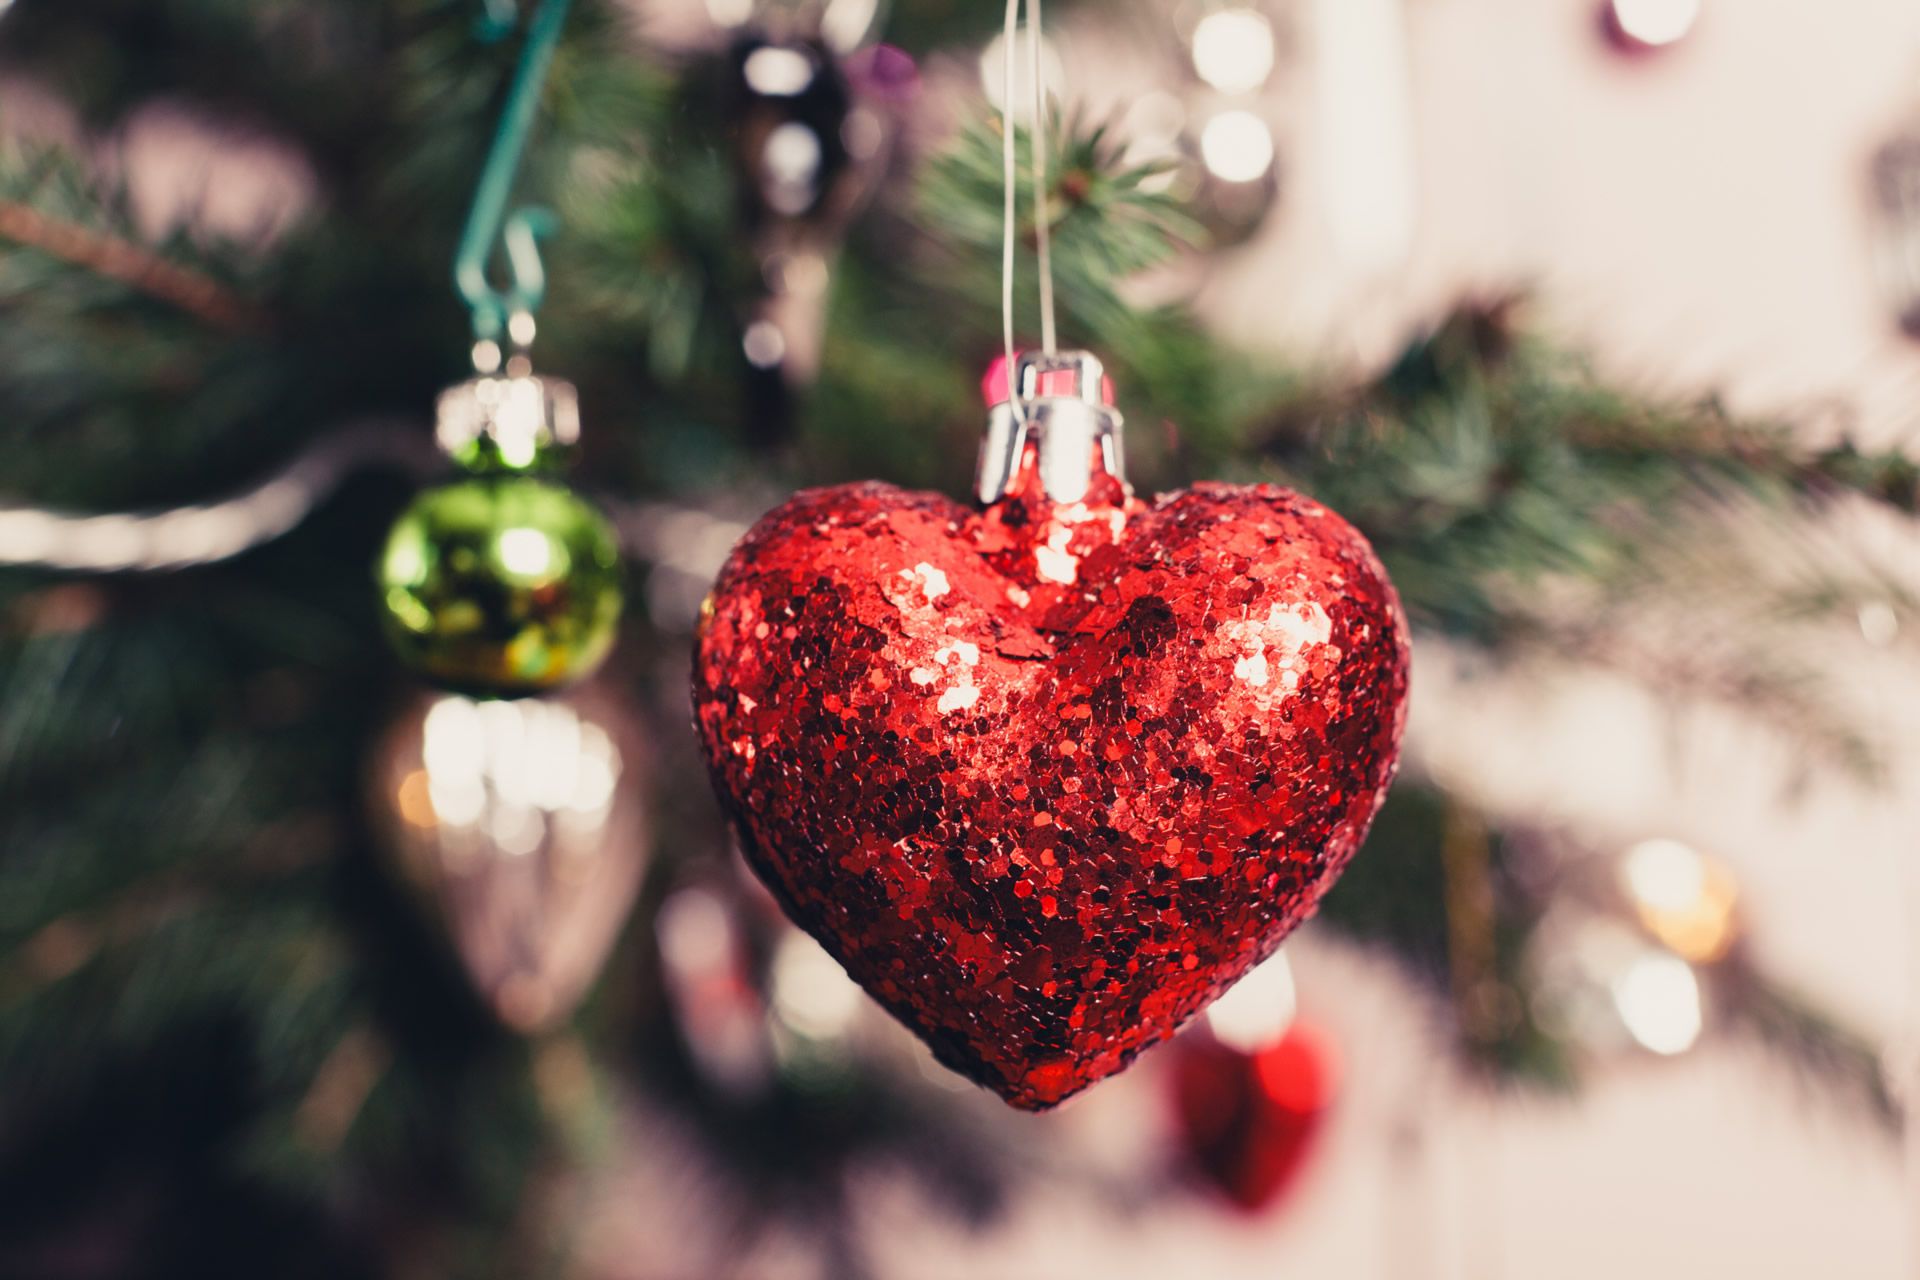 A sequinned, heart-shaped bauble on a Christmas tree.